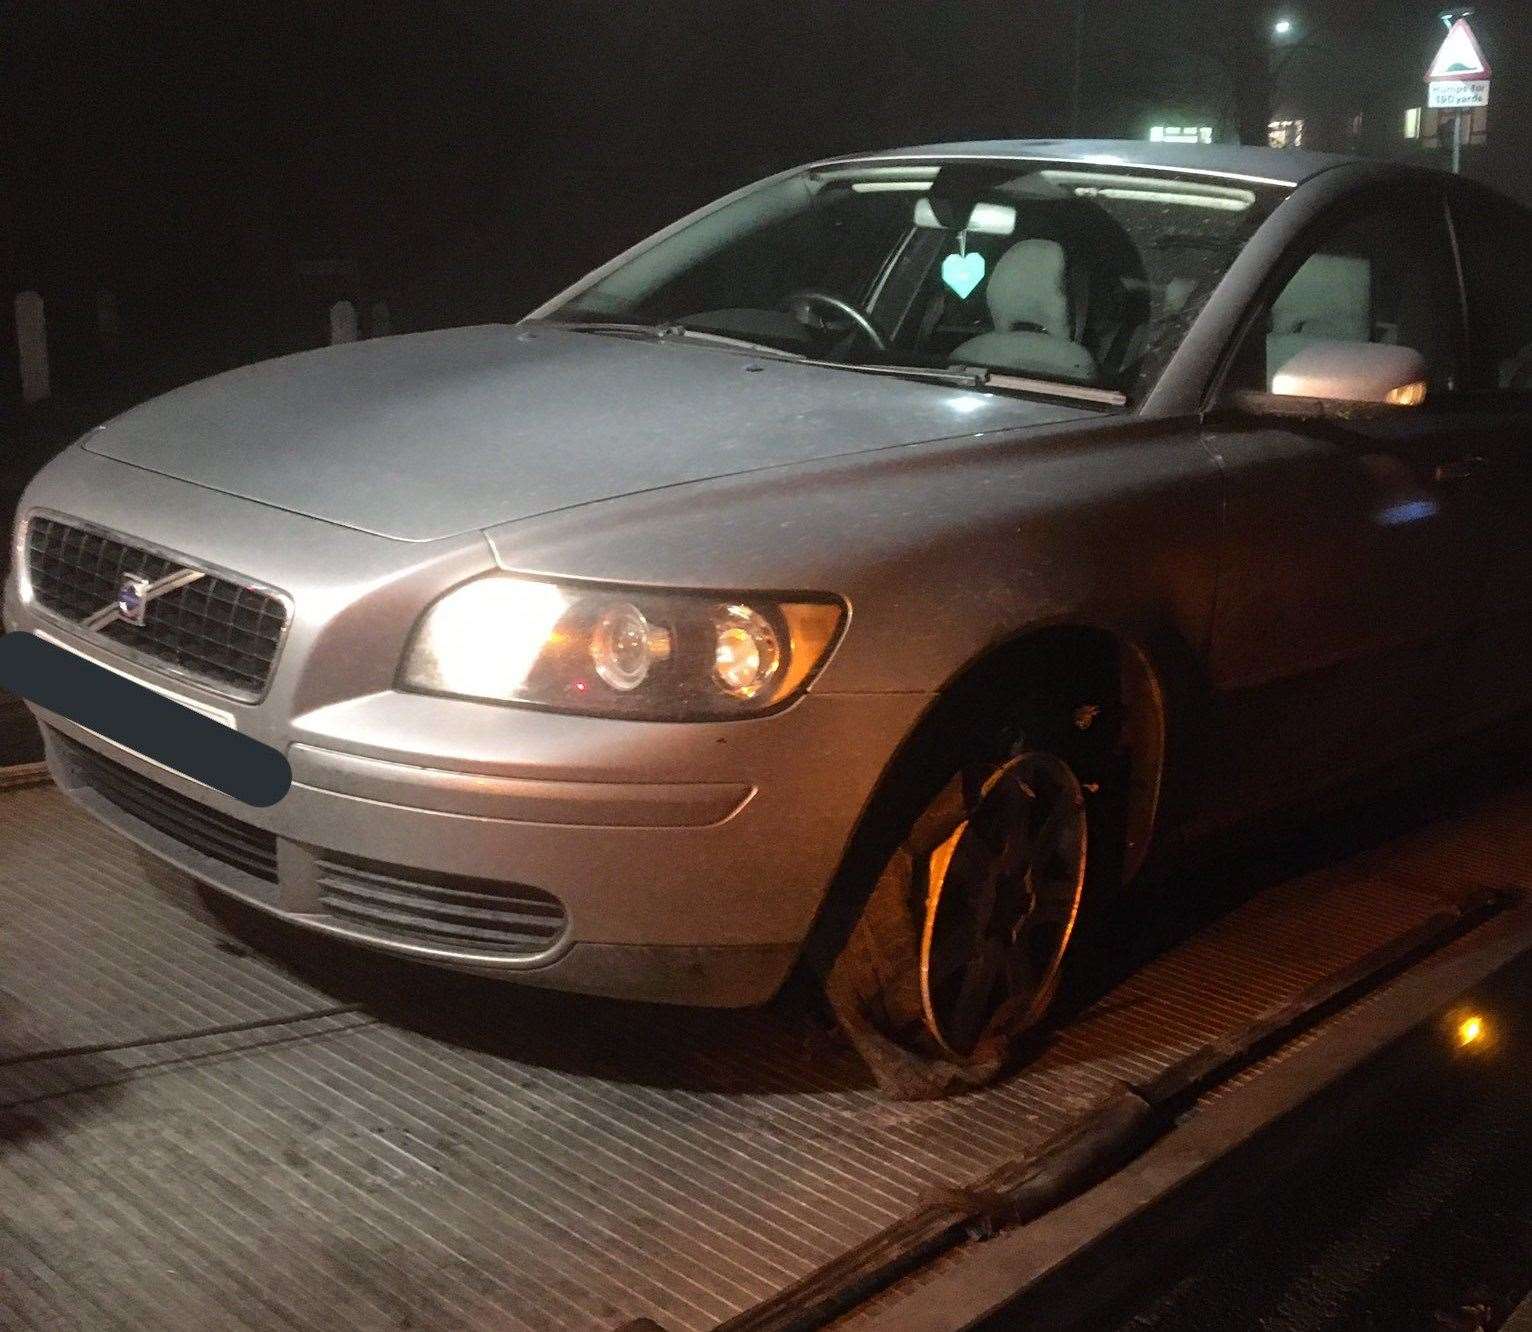 The Volvo estate reached up to 110mph in the chase. Photo: Kent Police RPU